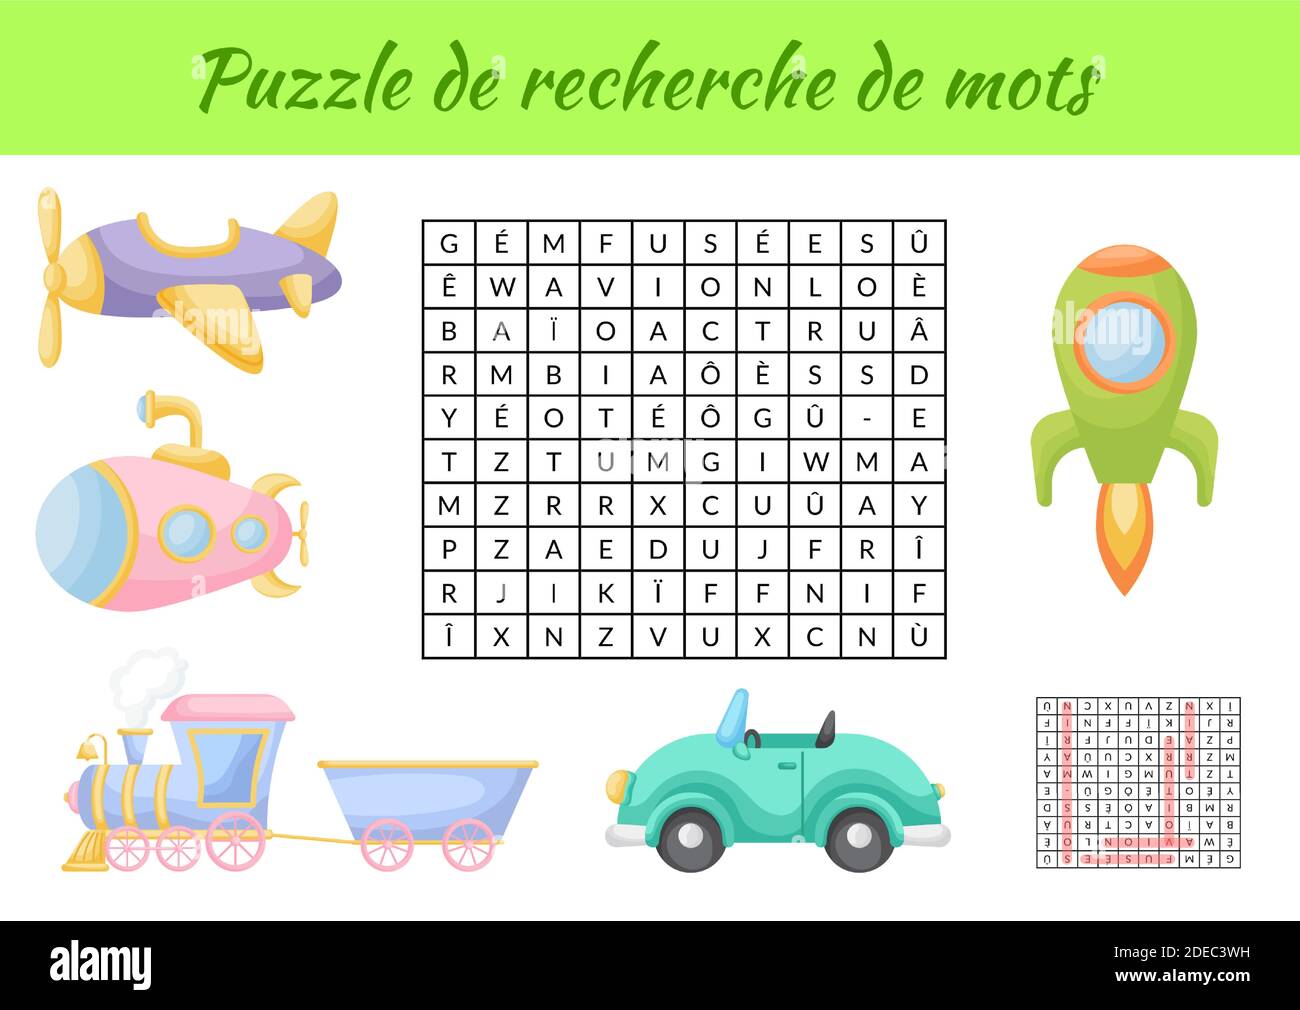 Puzzle De Recherche De Mots Word Search Puzzle With Pictures Educational Game For Study French Words Kids Activity Worksheet Stock Vector Image Art Alamy